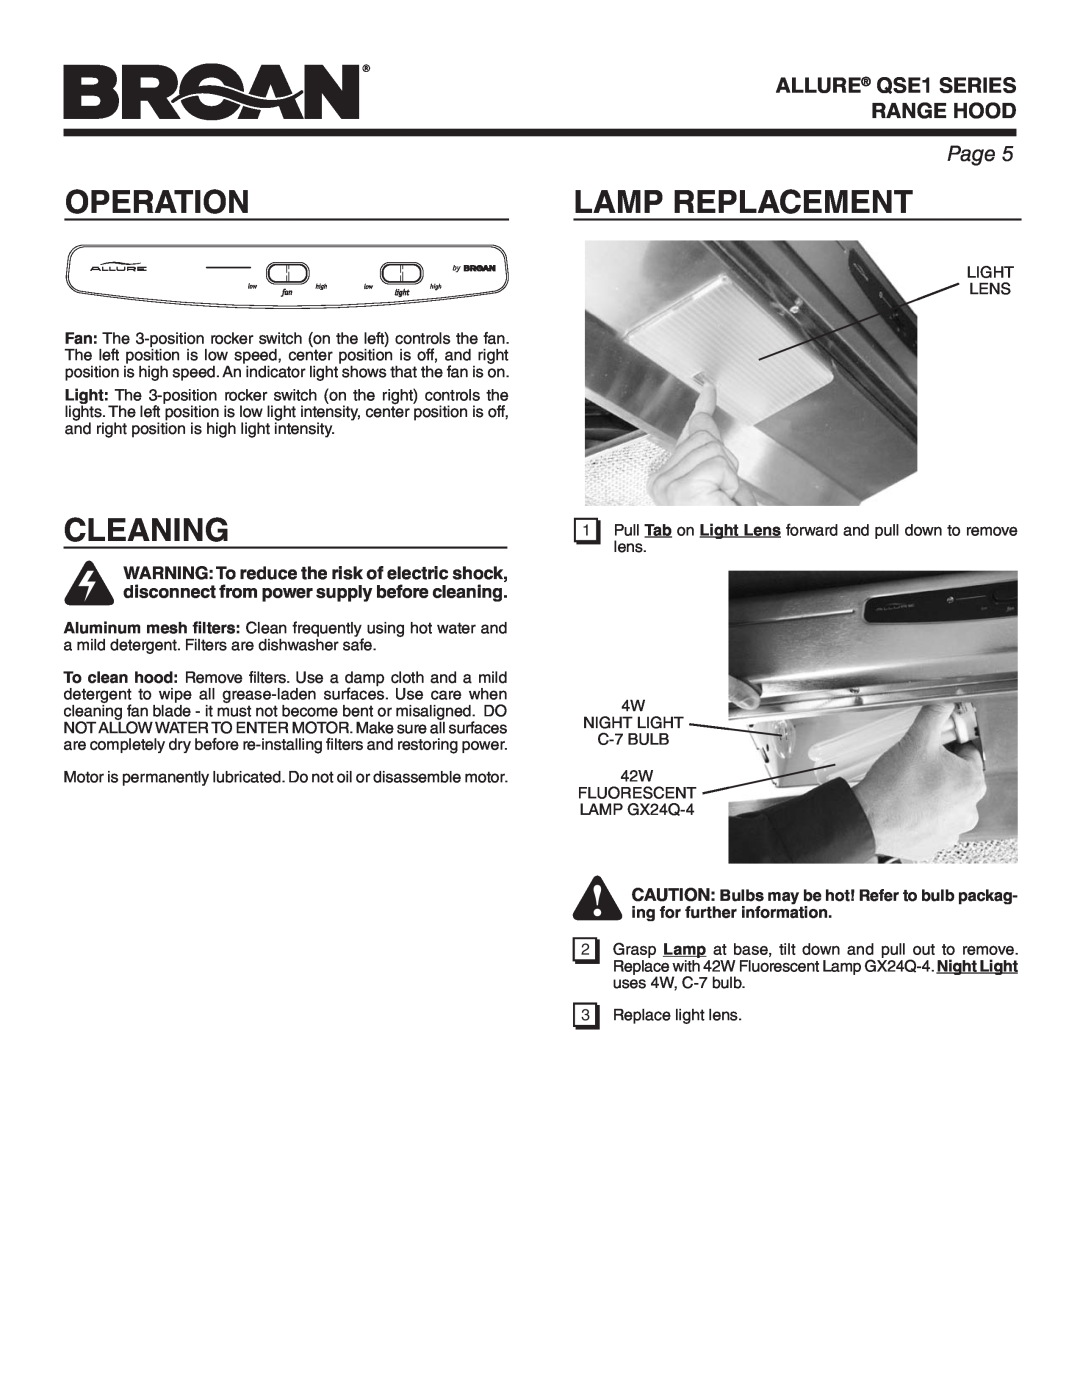 Broan warranty Operation, Cleaning, ALLURE QSE1 SERIES, Lamp Replacement, Range Hood, Page 